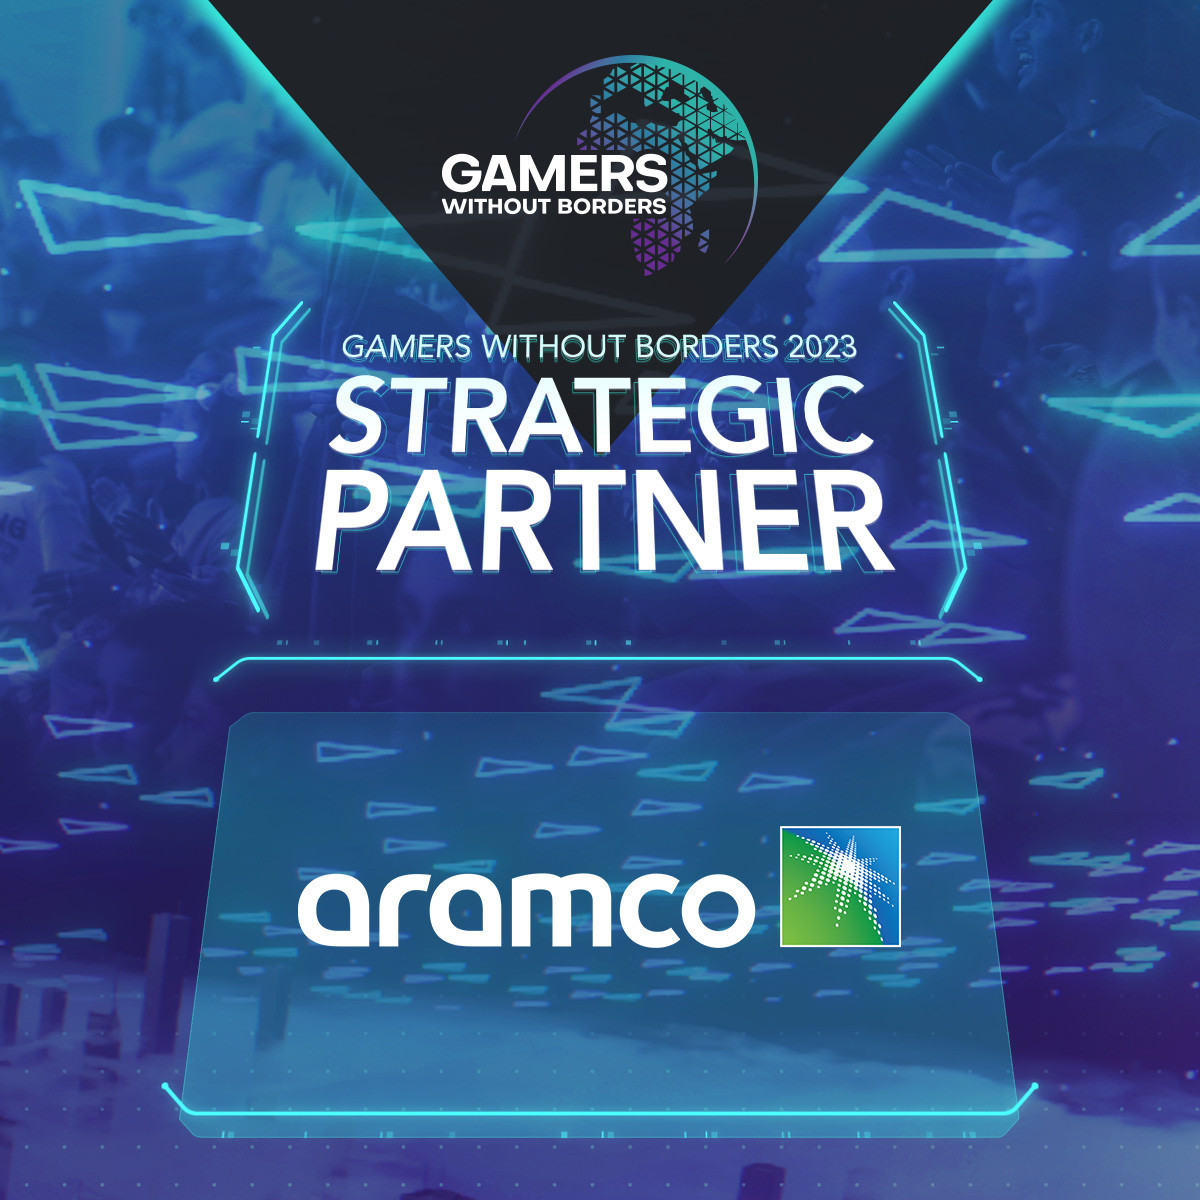 Aramco and the Saudi Esports Federation are partnering to sponsor Gamers Without Borders ©GWB